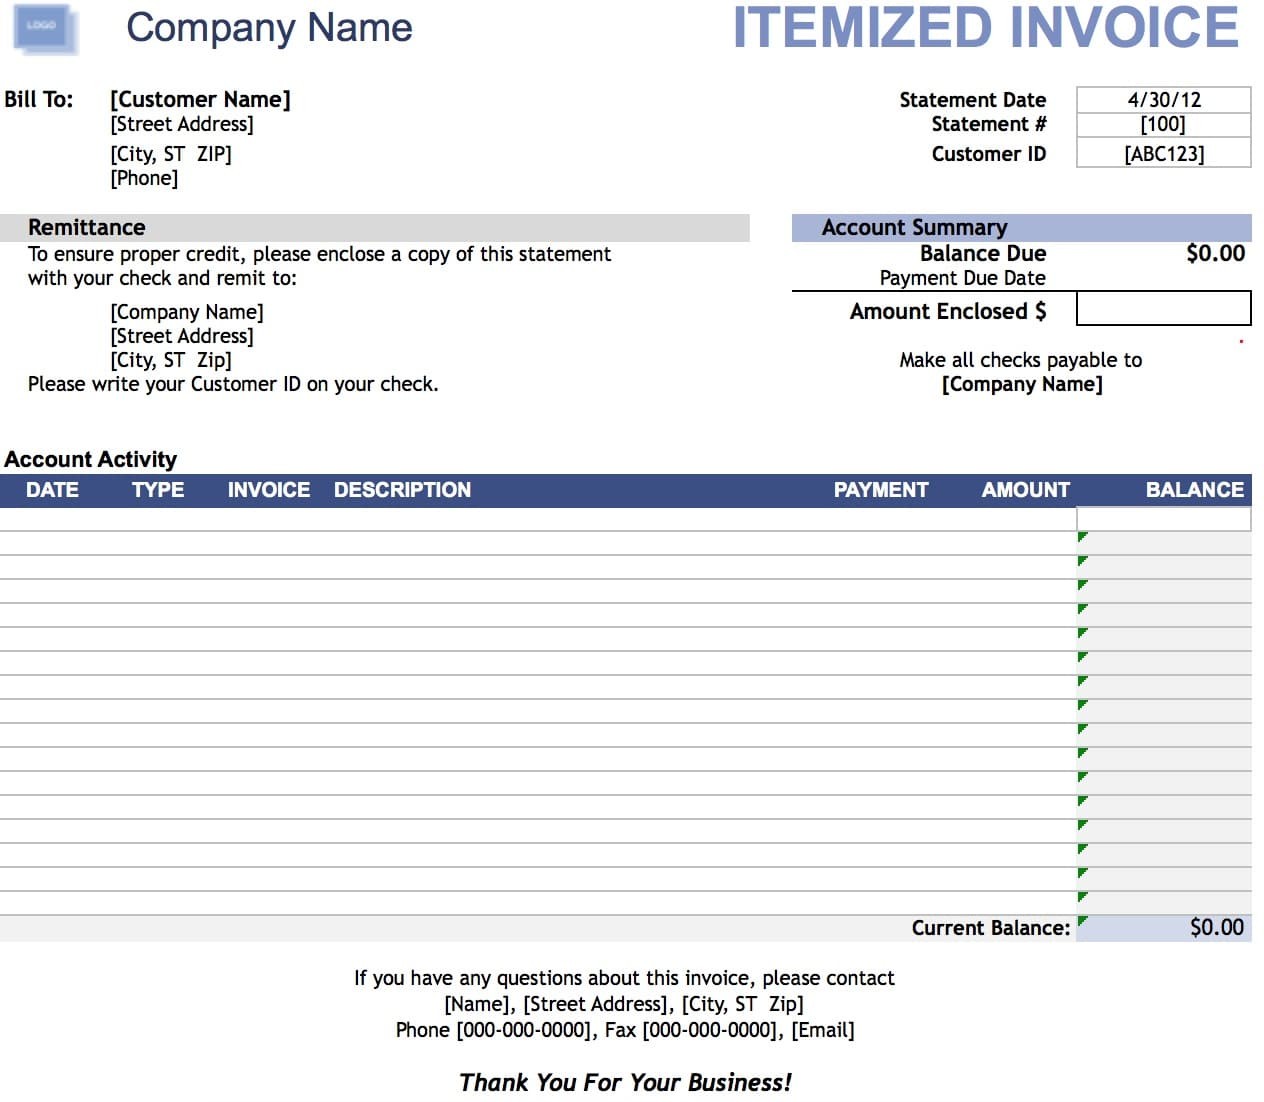 Free Itemized Invoice Template Excel PDF Word Doc Phone